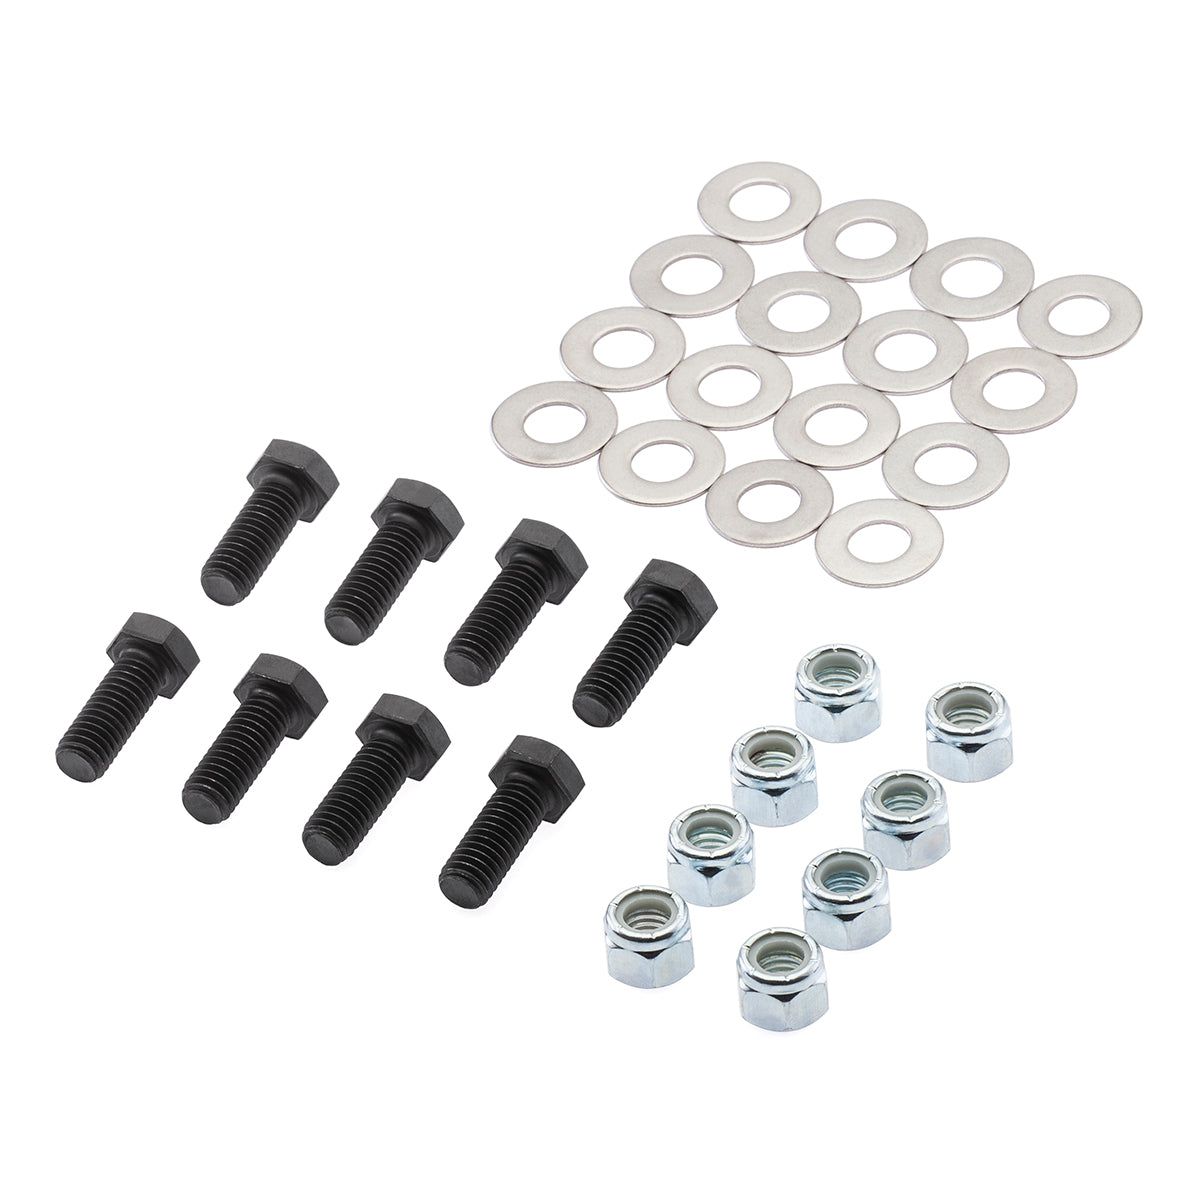 2003-2020 Dodge Ram 2500 Rear Bump Stop Relocation Spacer Kit